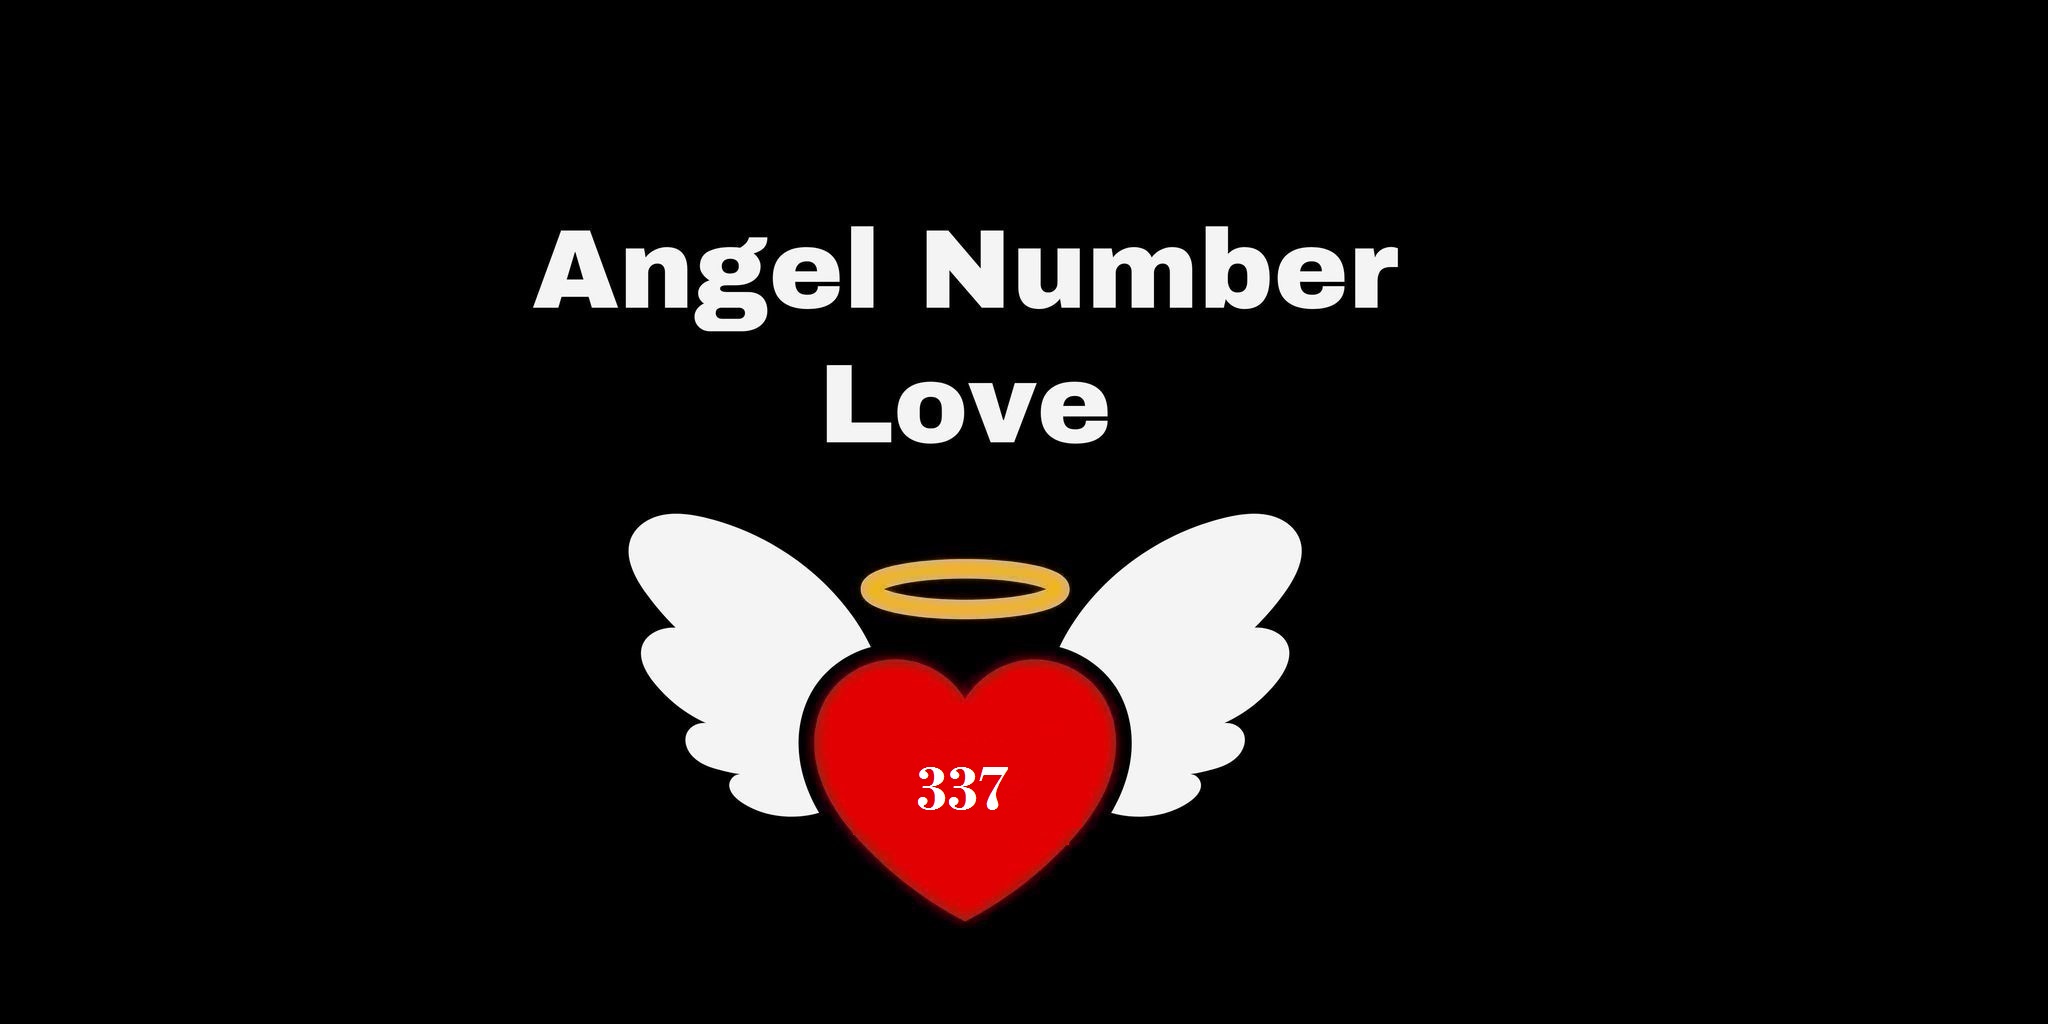 337 Angel Number Meaning In Love